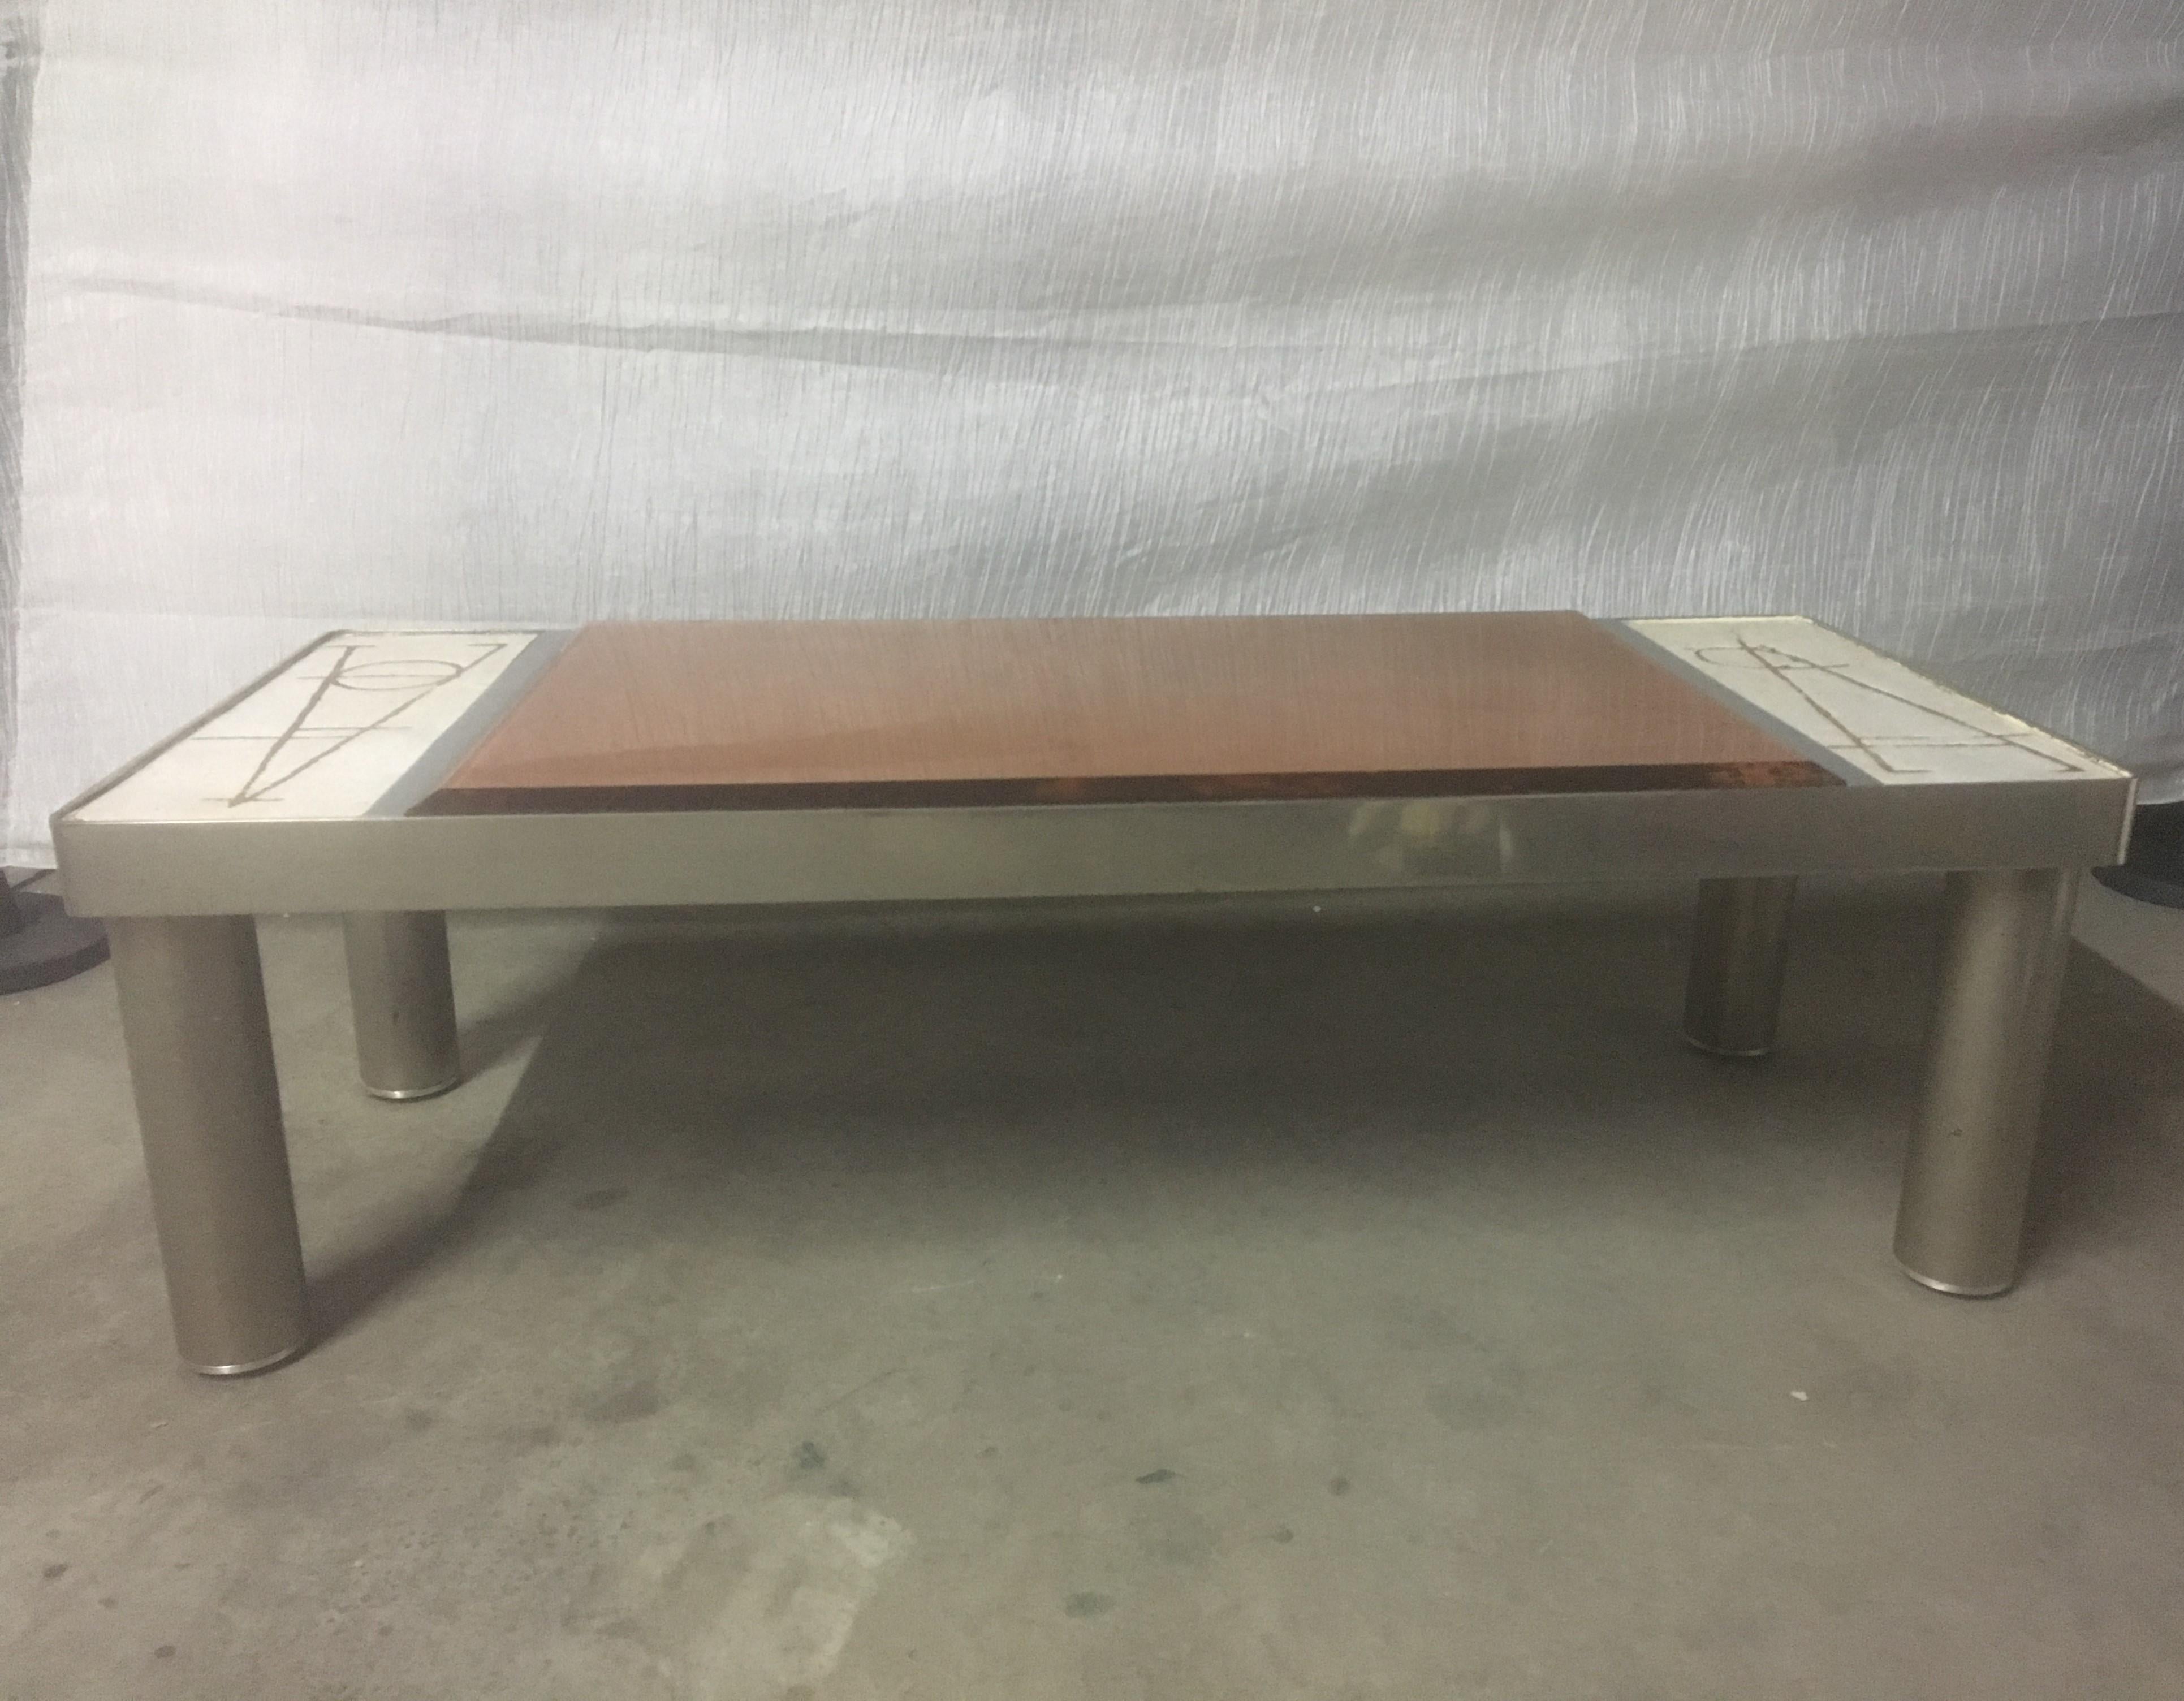 Ceramic and Chromed Metal Rectangular Coffee Table, Brown Glass Slab Top, 1970s In Good Condition For Sale In Aix En Provence, FR